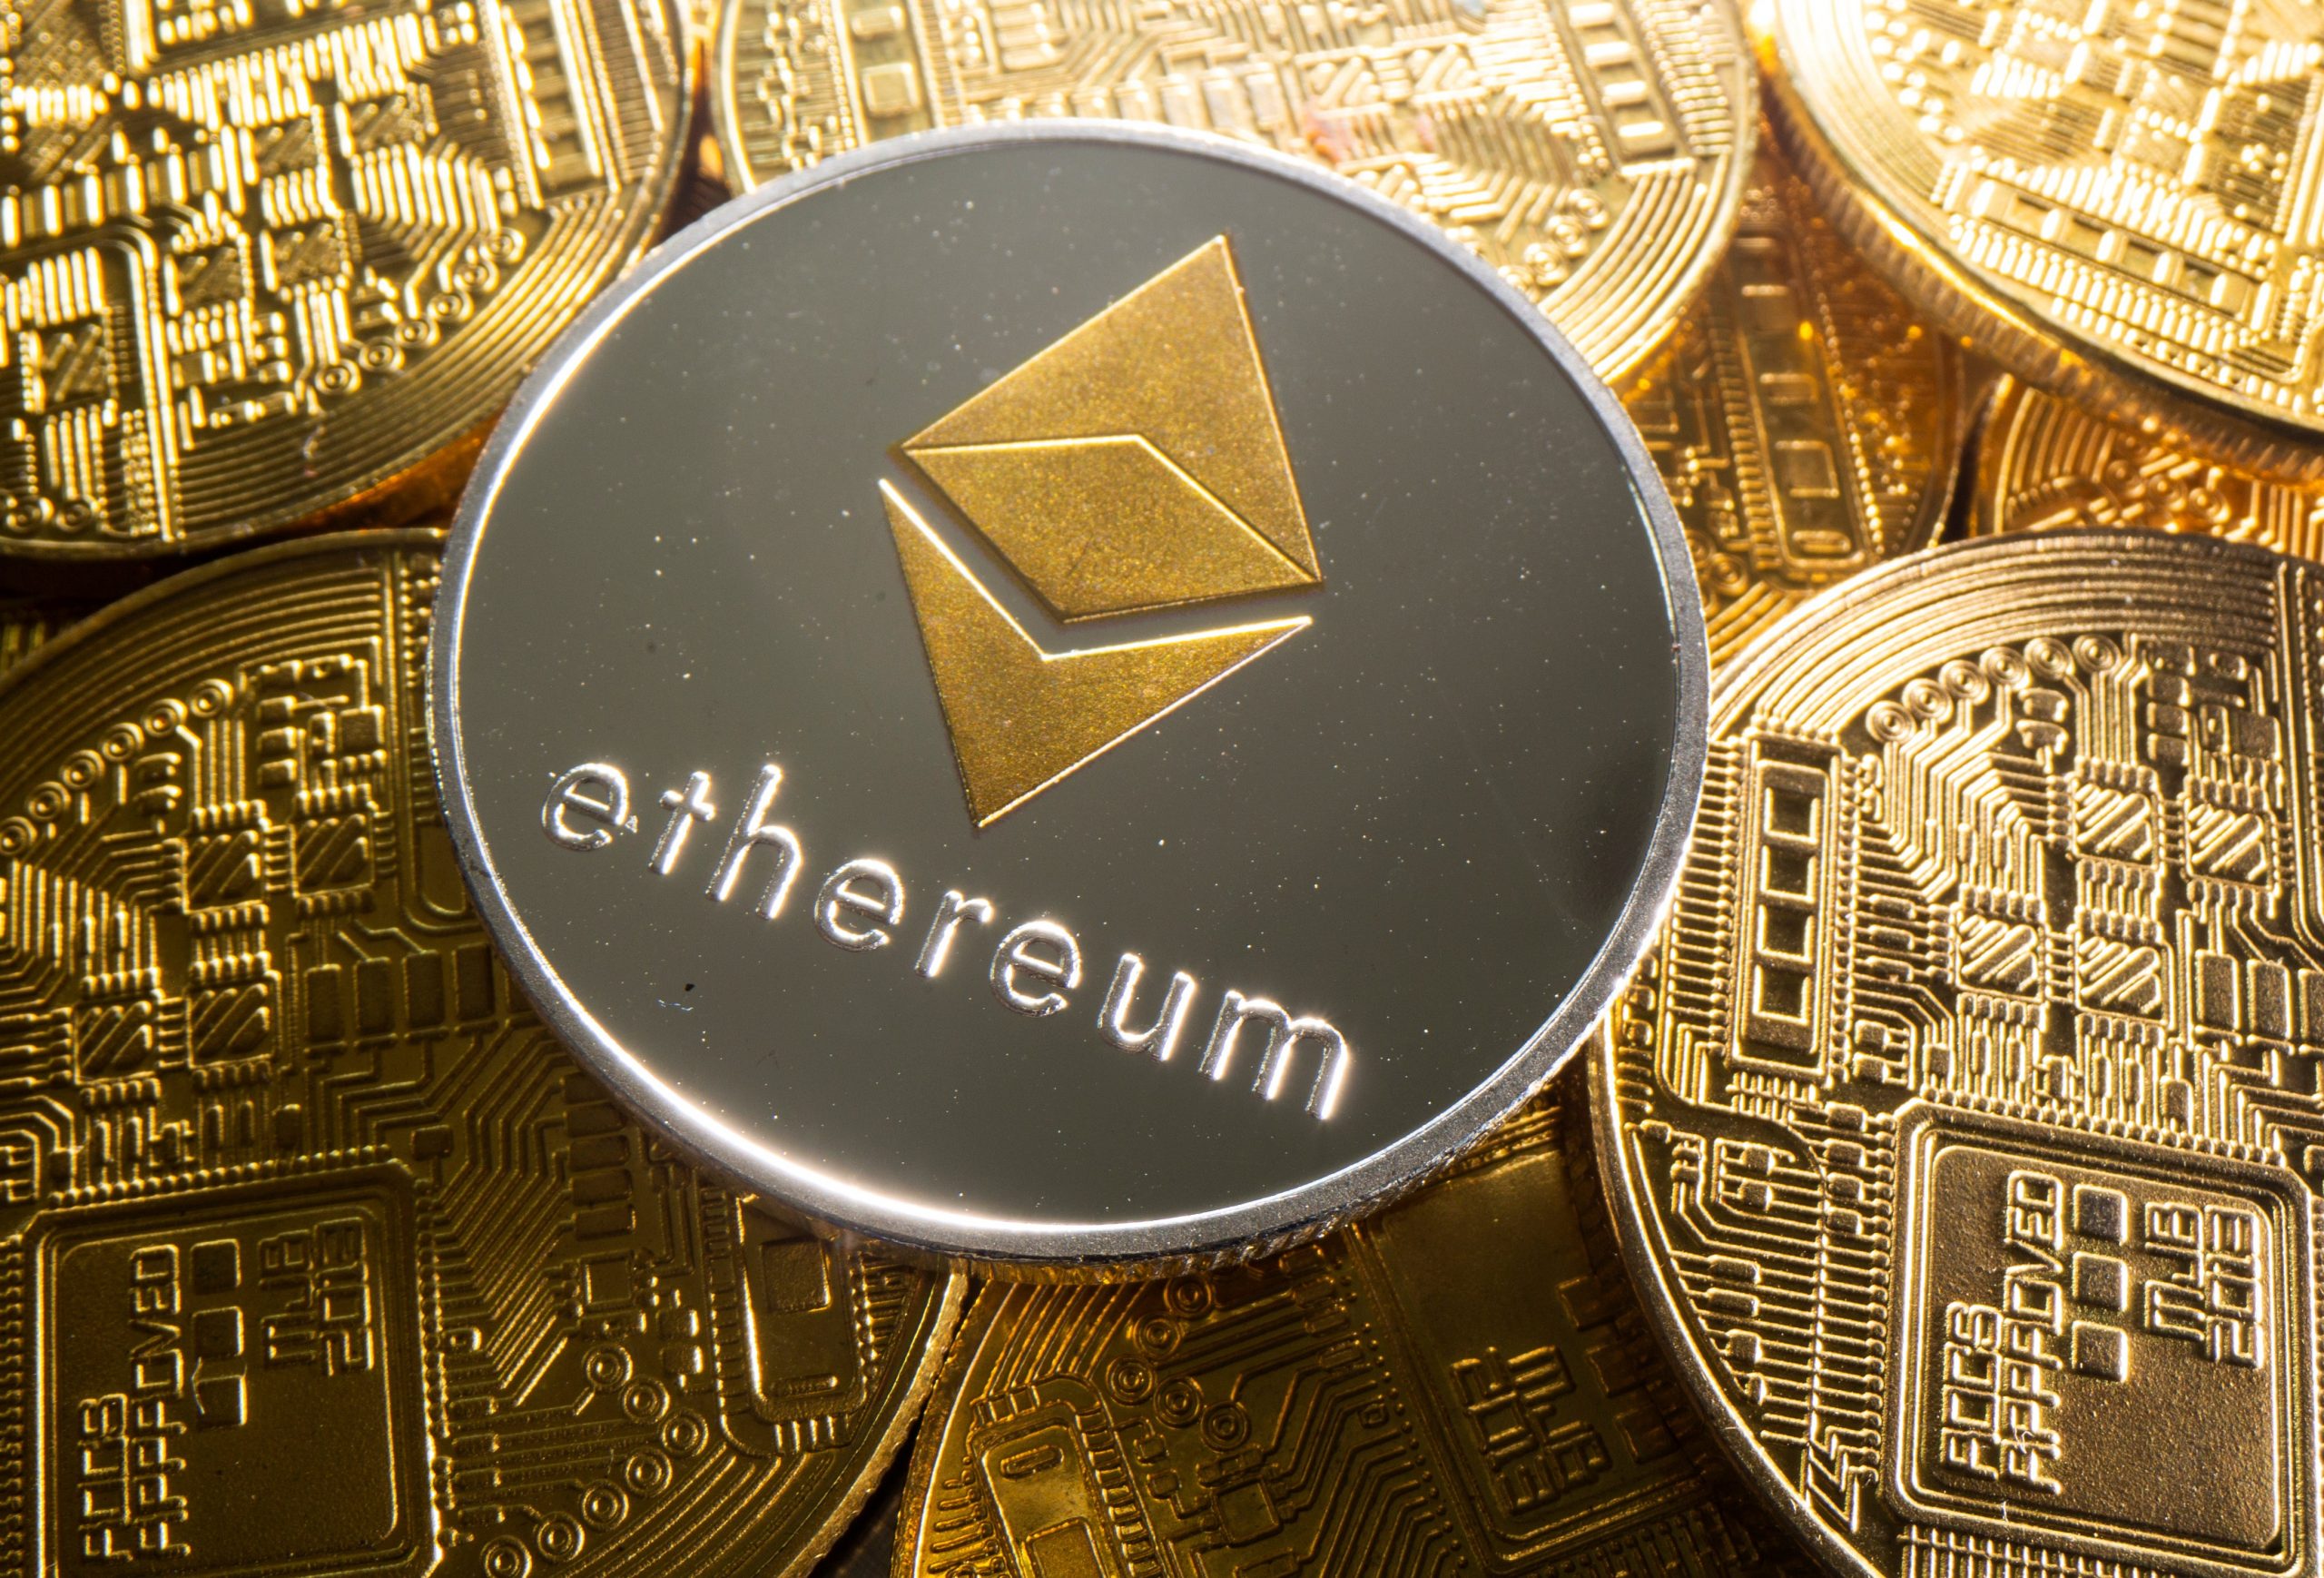 A coin withe an Ethereum logo on top of other gold coins